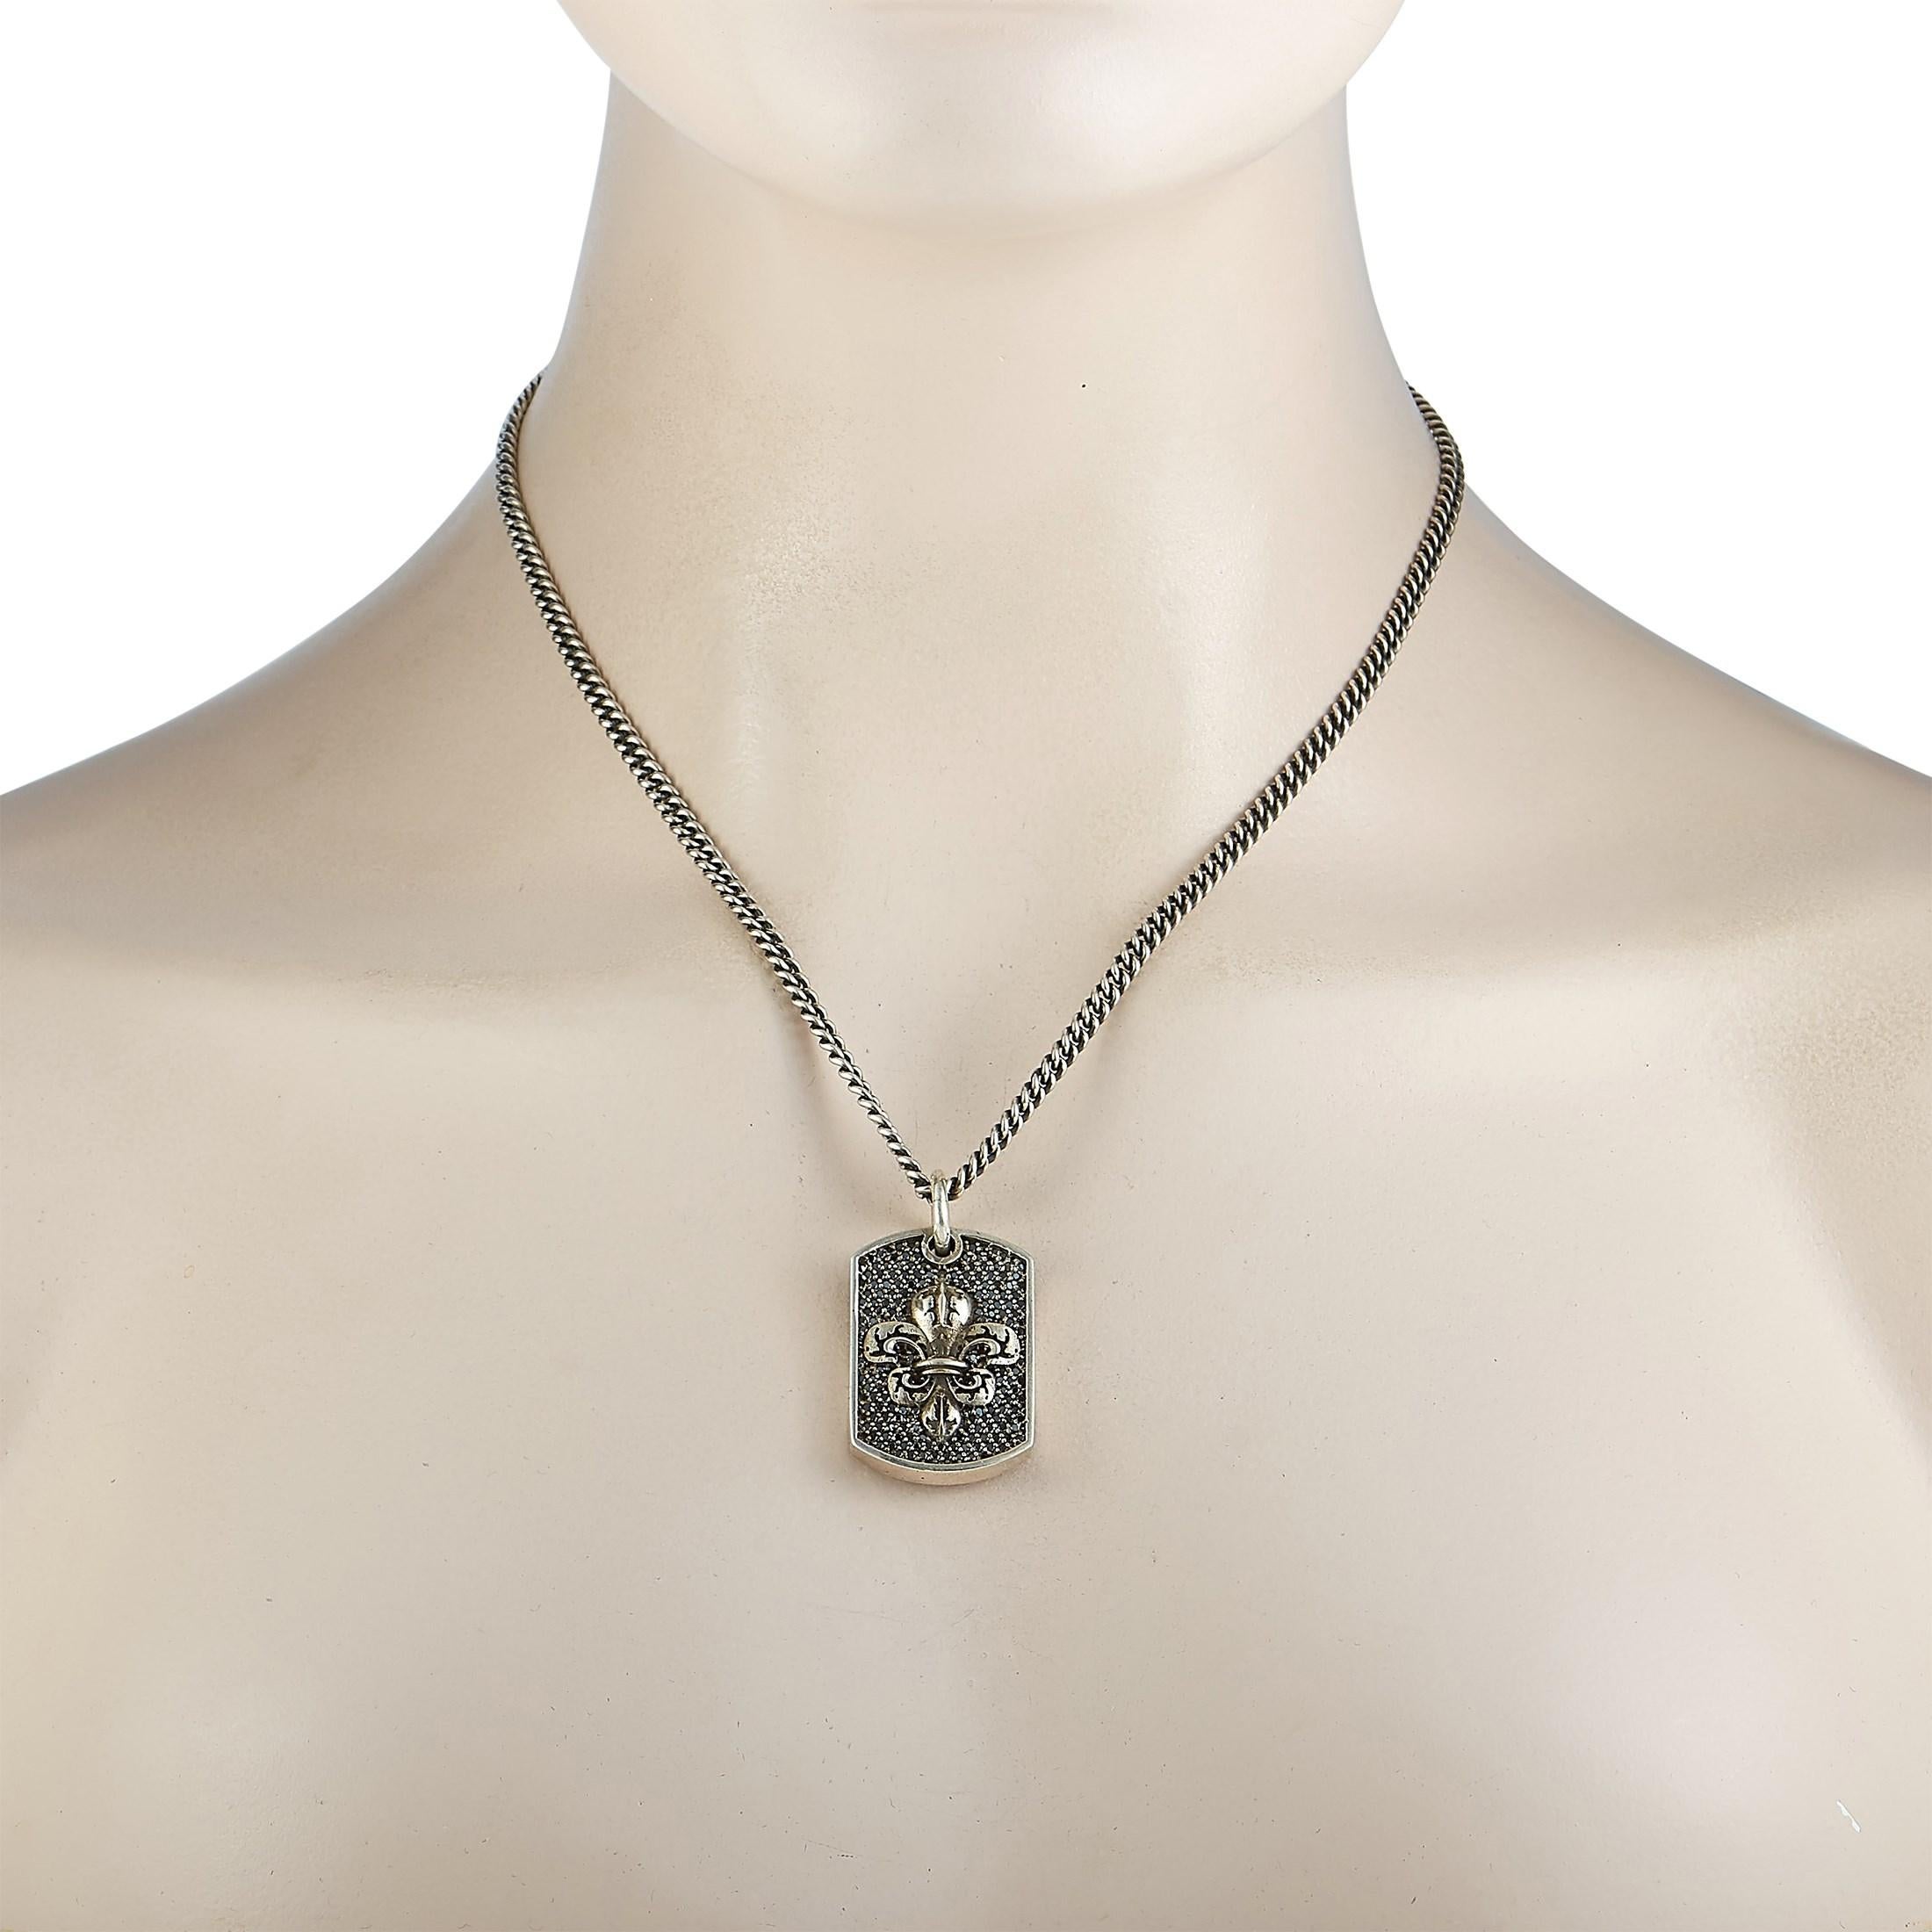 This King Baby necklace is made of silver and embellished with black diamonds. The necklace weighs 38 grams and is presented with an 18” chain, boasting a 1.62” by 0.87” dog tag pendant with a fleur-de-lis motif.

Offered in brand-new condition,